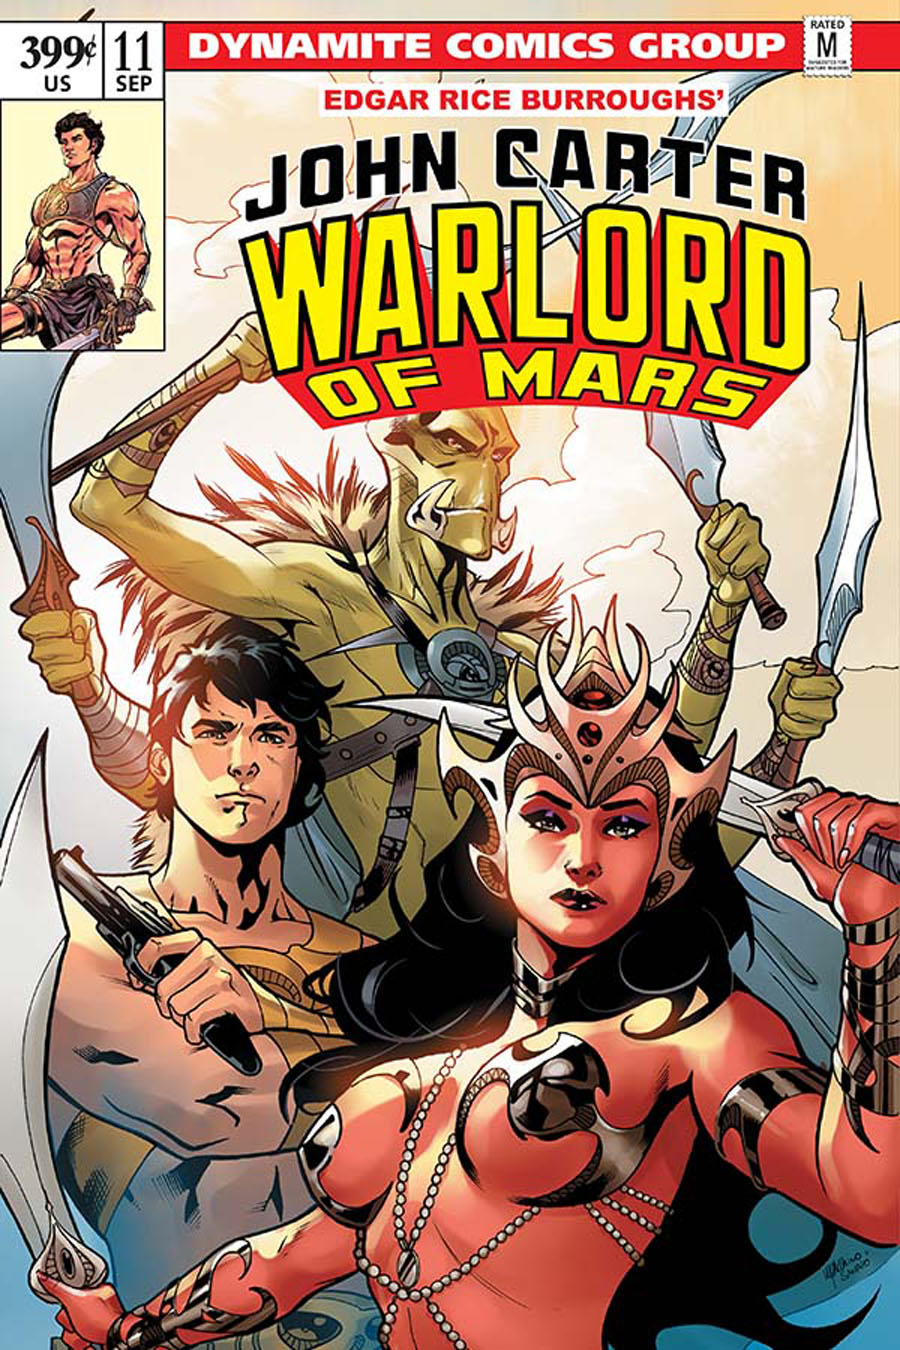 John Carter Warlord Of Mars Vol 2 #11 Cover C Variant Emanuela Lupacchino Cover